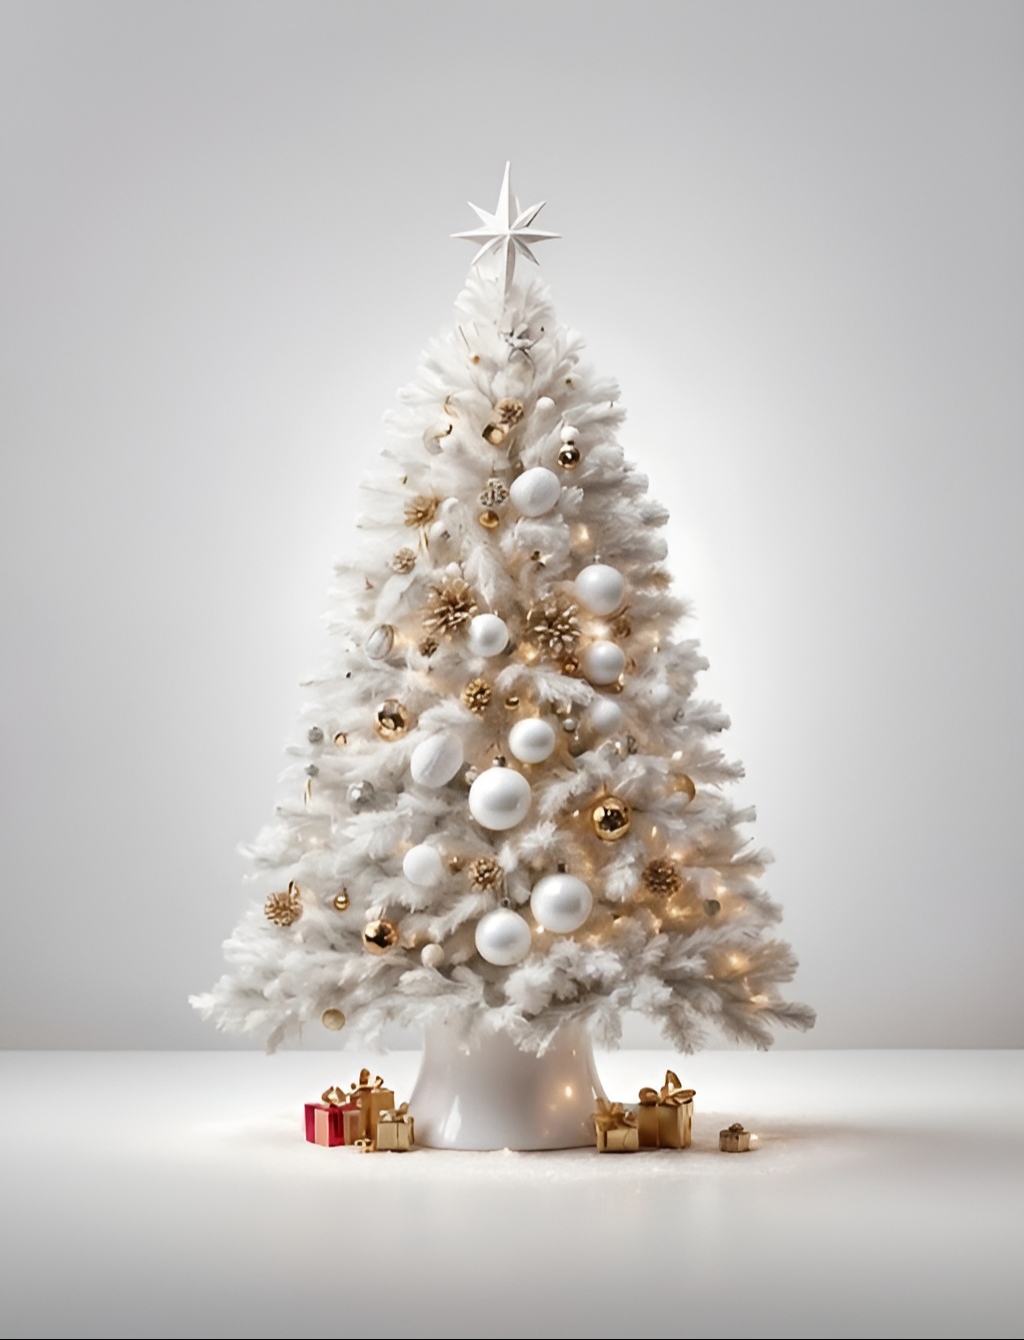 White Christmas Background Image Download